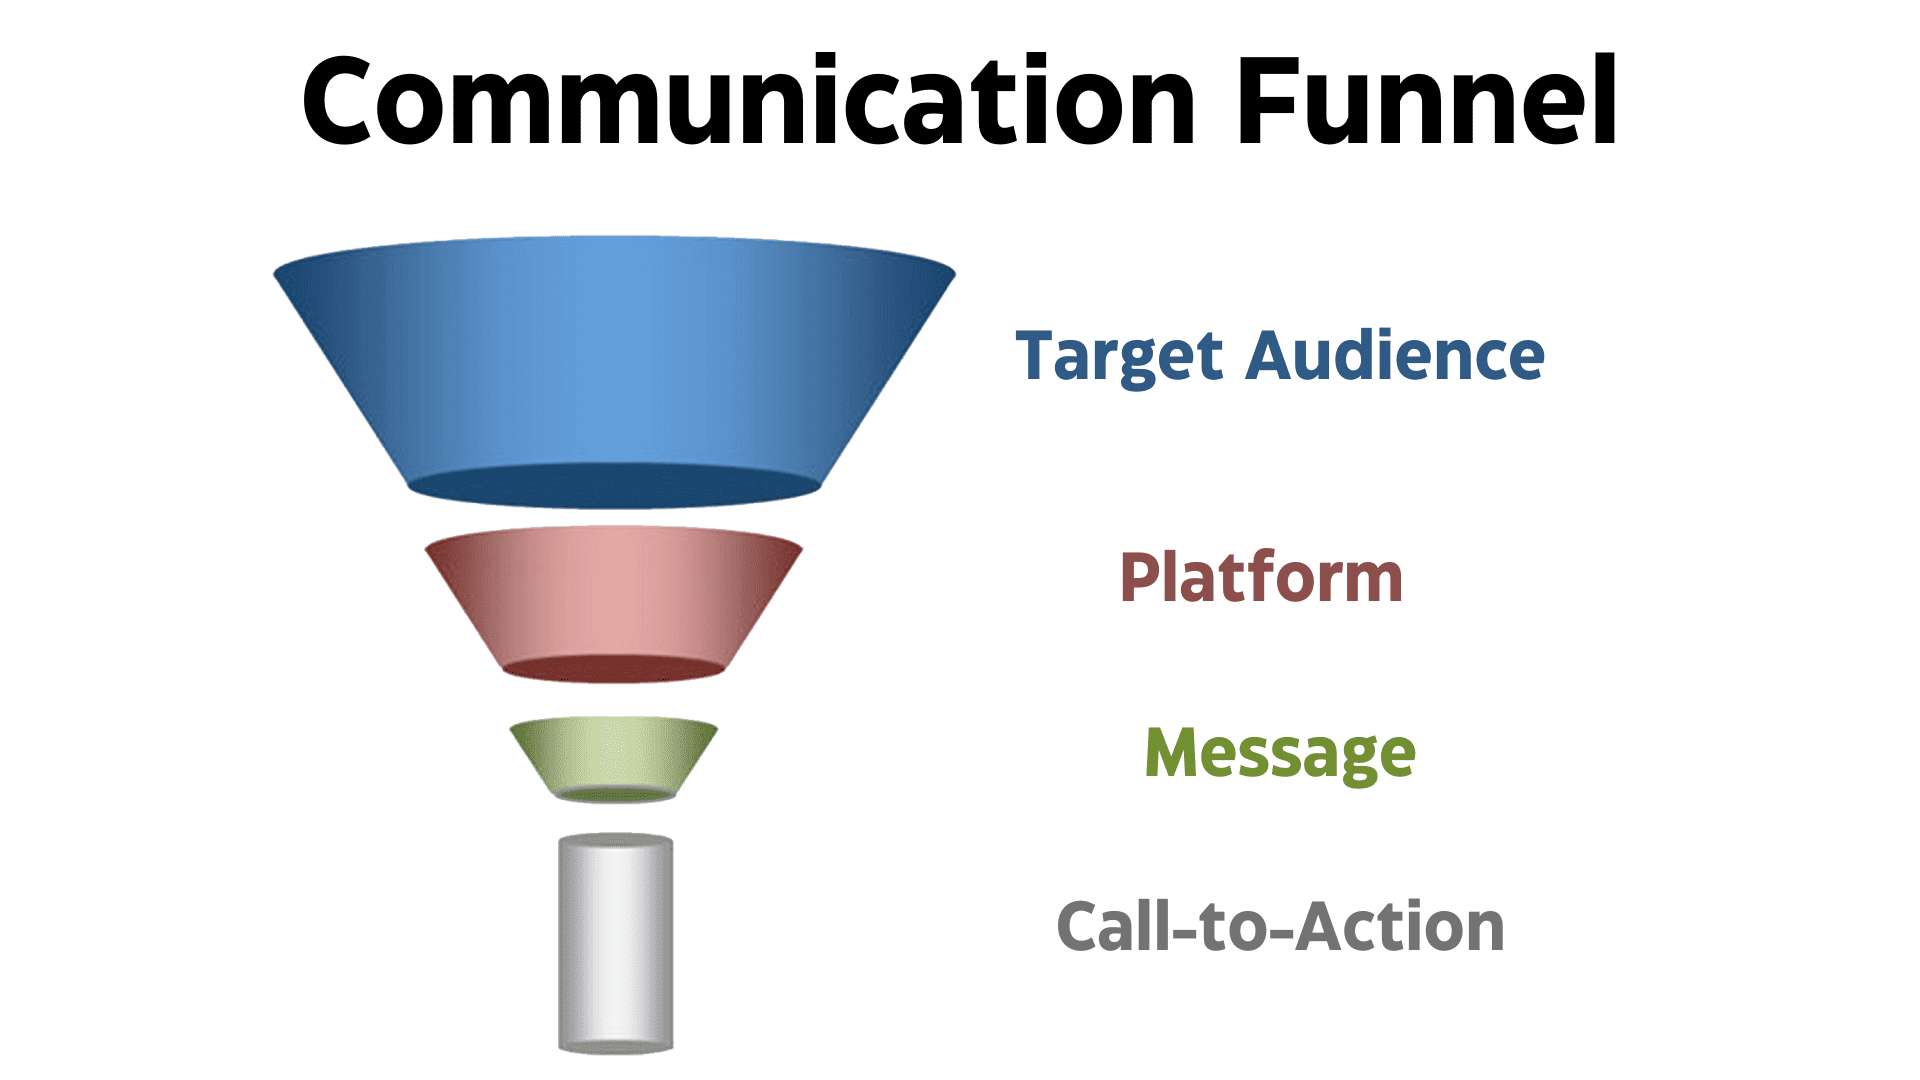 Communication Funnel starts with the Target Audience, then Platform, Message, and ends with Call to Action.